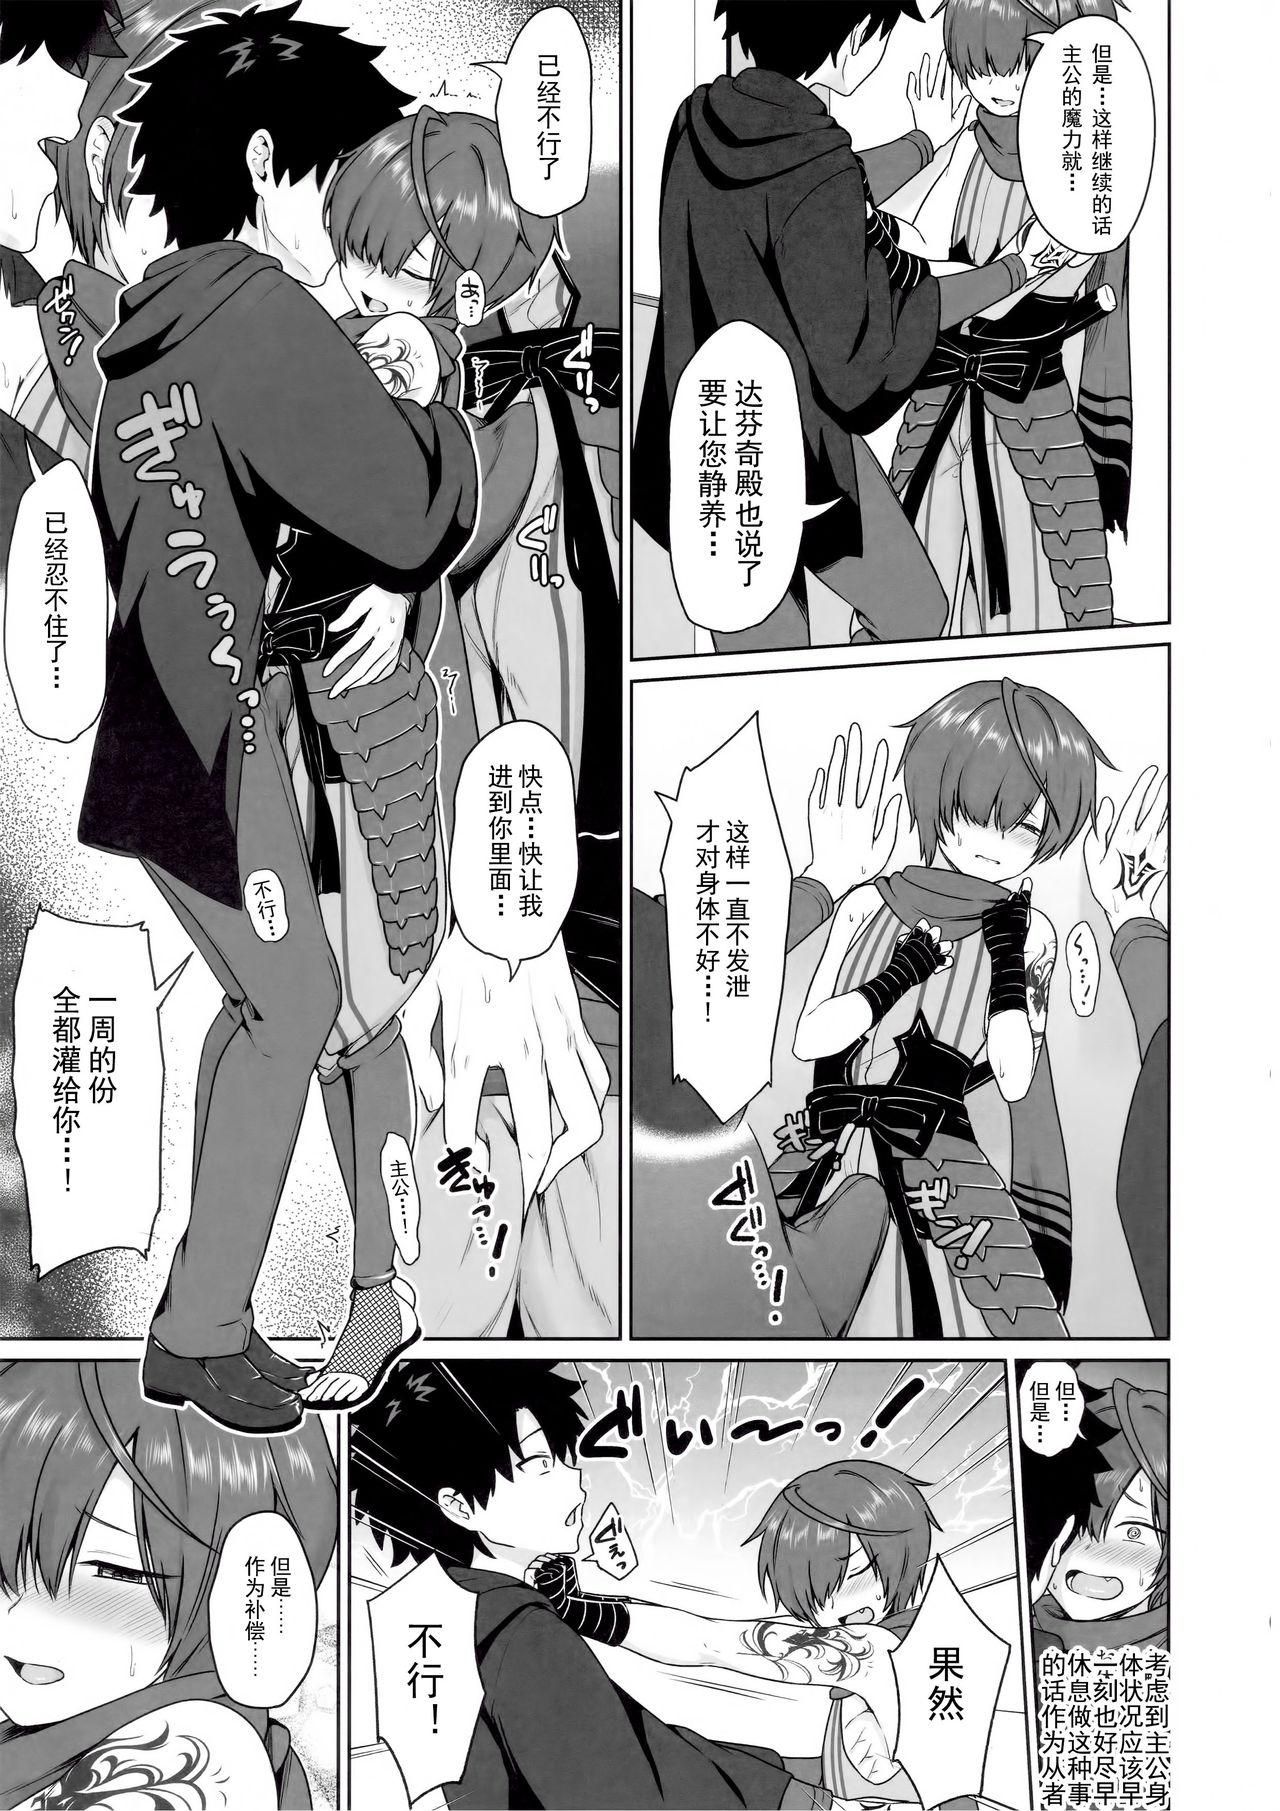 Pigtails Ikemasen Aruji-dono|这样不行，主公 - Fate grand order Pussyeating - Page 6